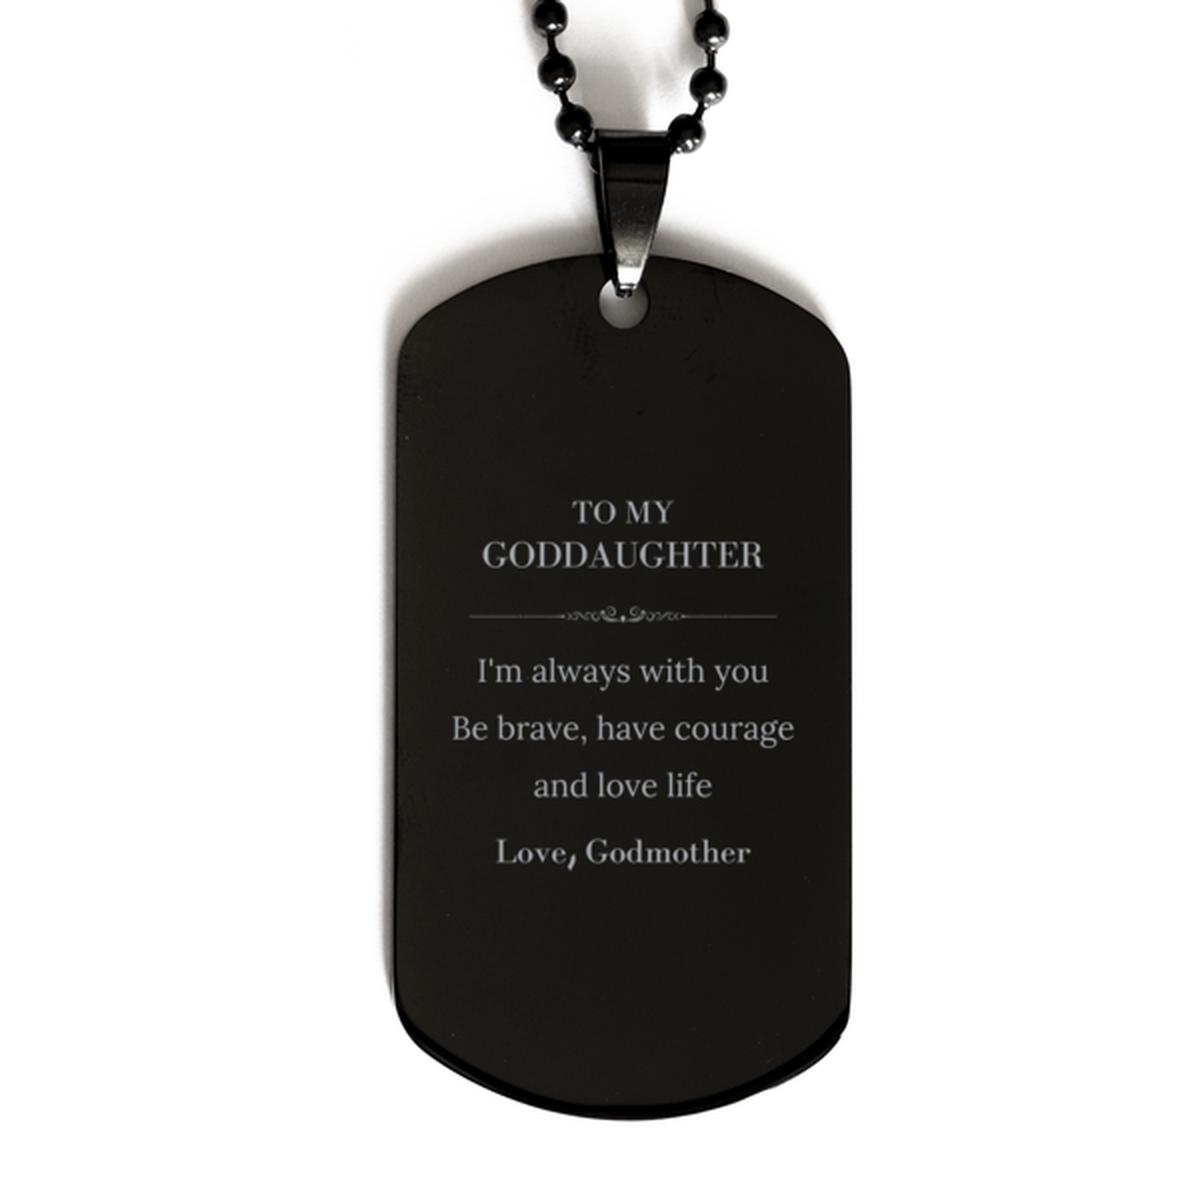 To My Goddaughter Gifts from Godmother, Unique Black Dog Tag Inspirational Christmas Birthday Graduation Gifts for Goddaughter I'm always with you. Be brave, have courage and love life. Love, Godmother